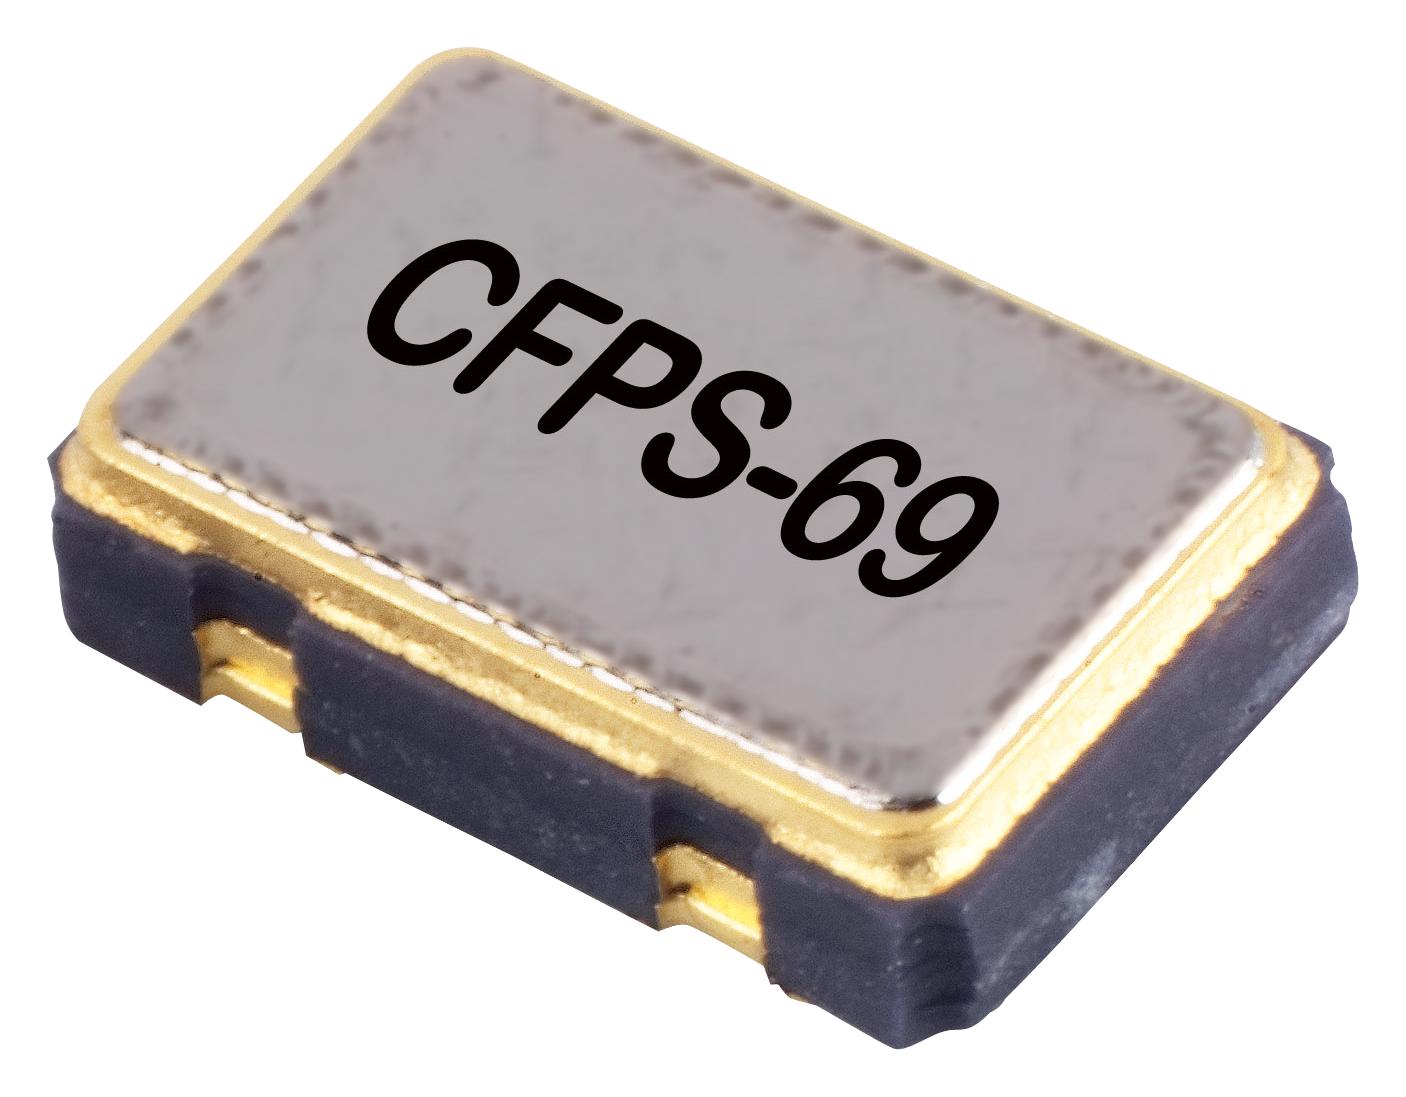 LFSPXO009585 CRYSTAL OSCILLATOR, SMD, 12MHZ IQD FREQUENCY PRODUCTS